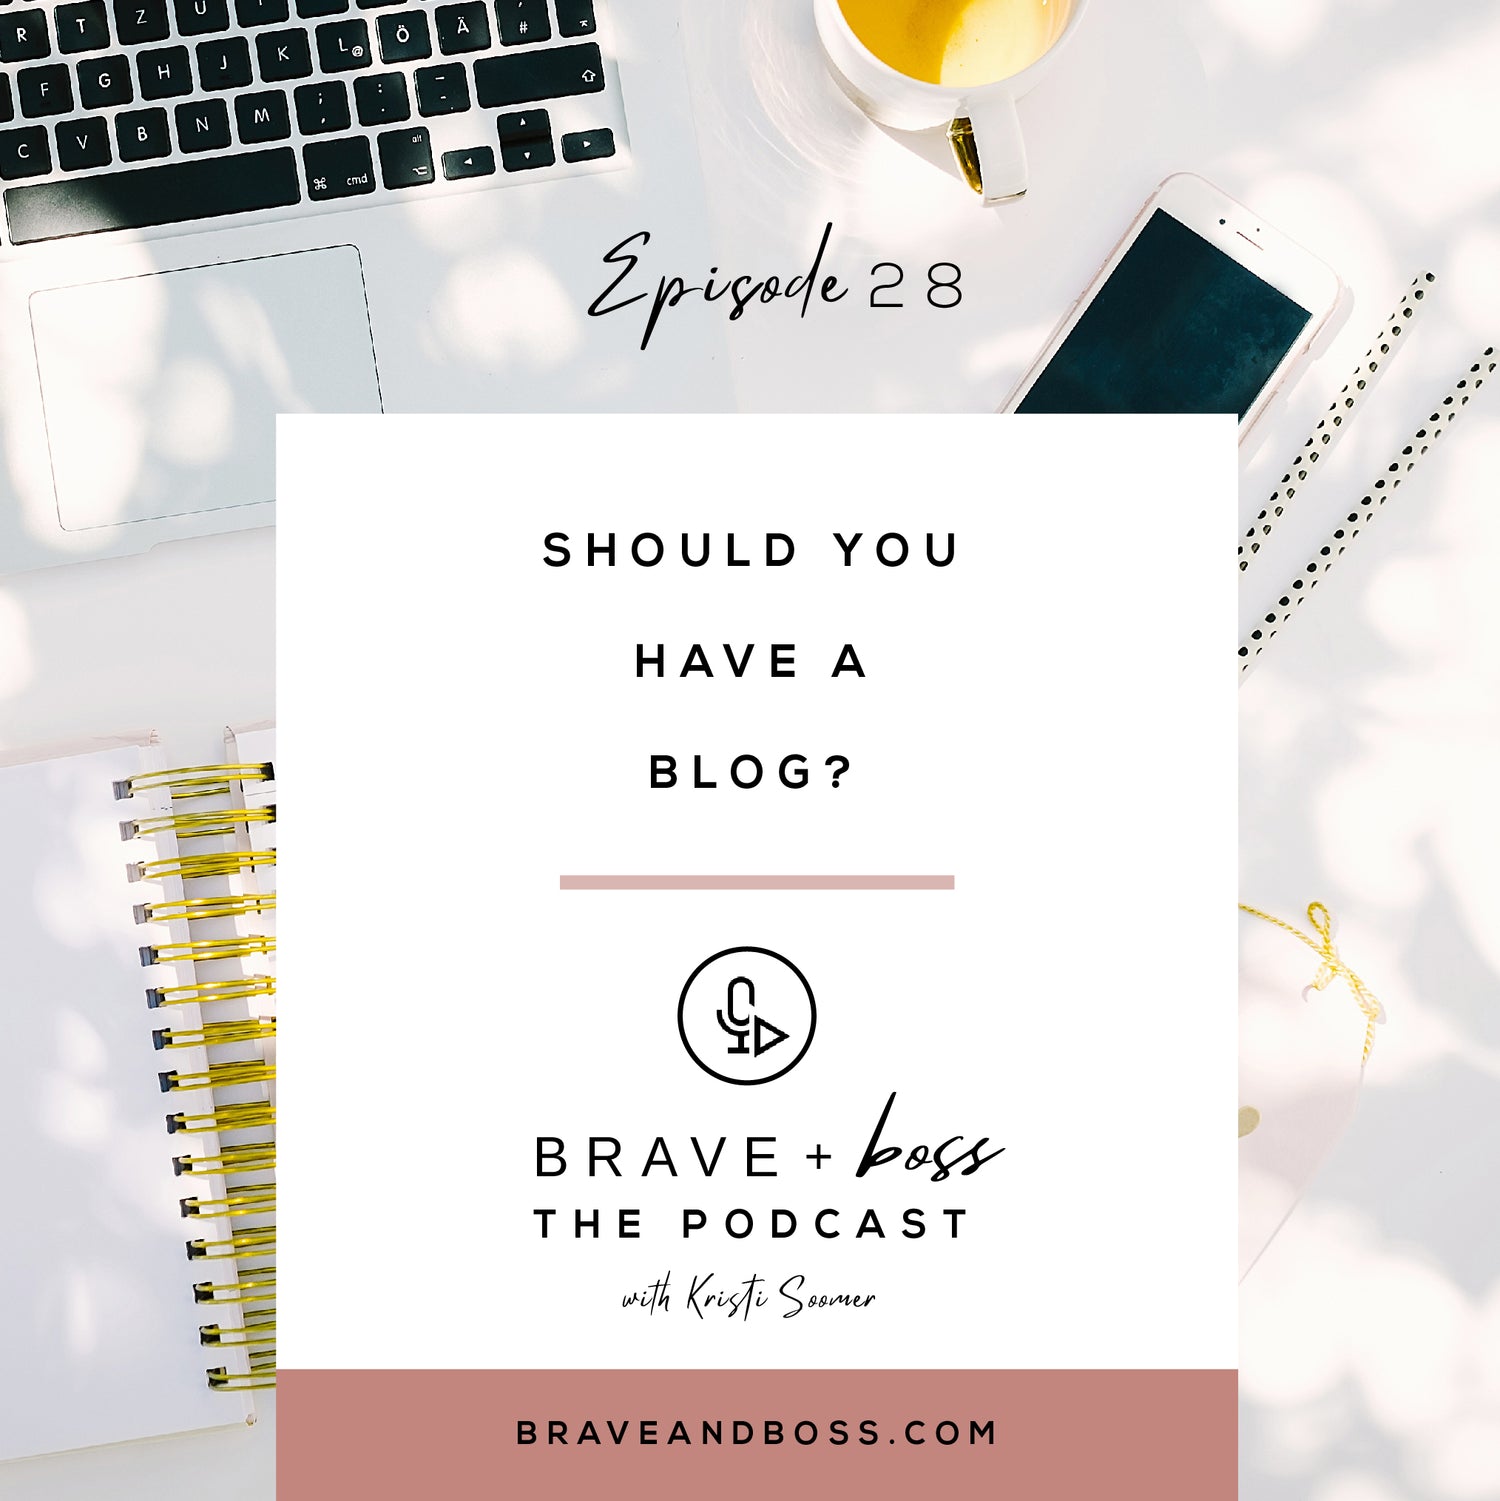 Should You Have a Blog?